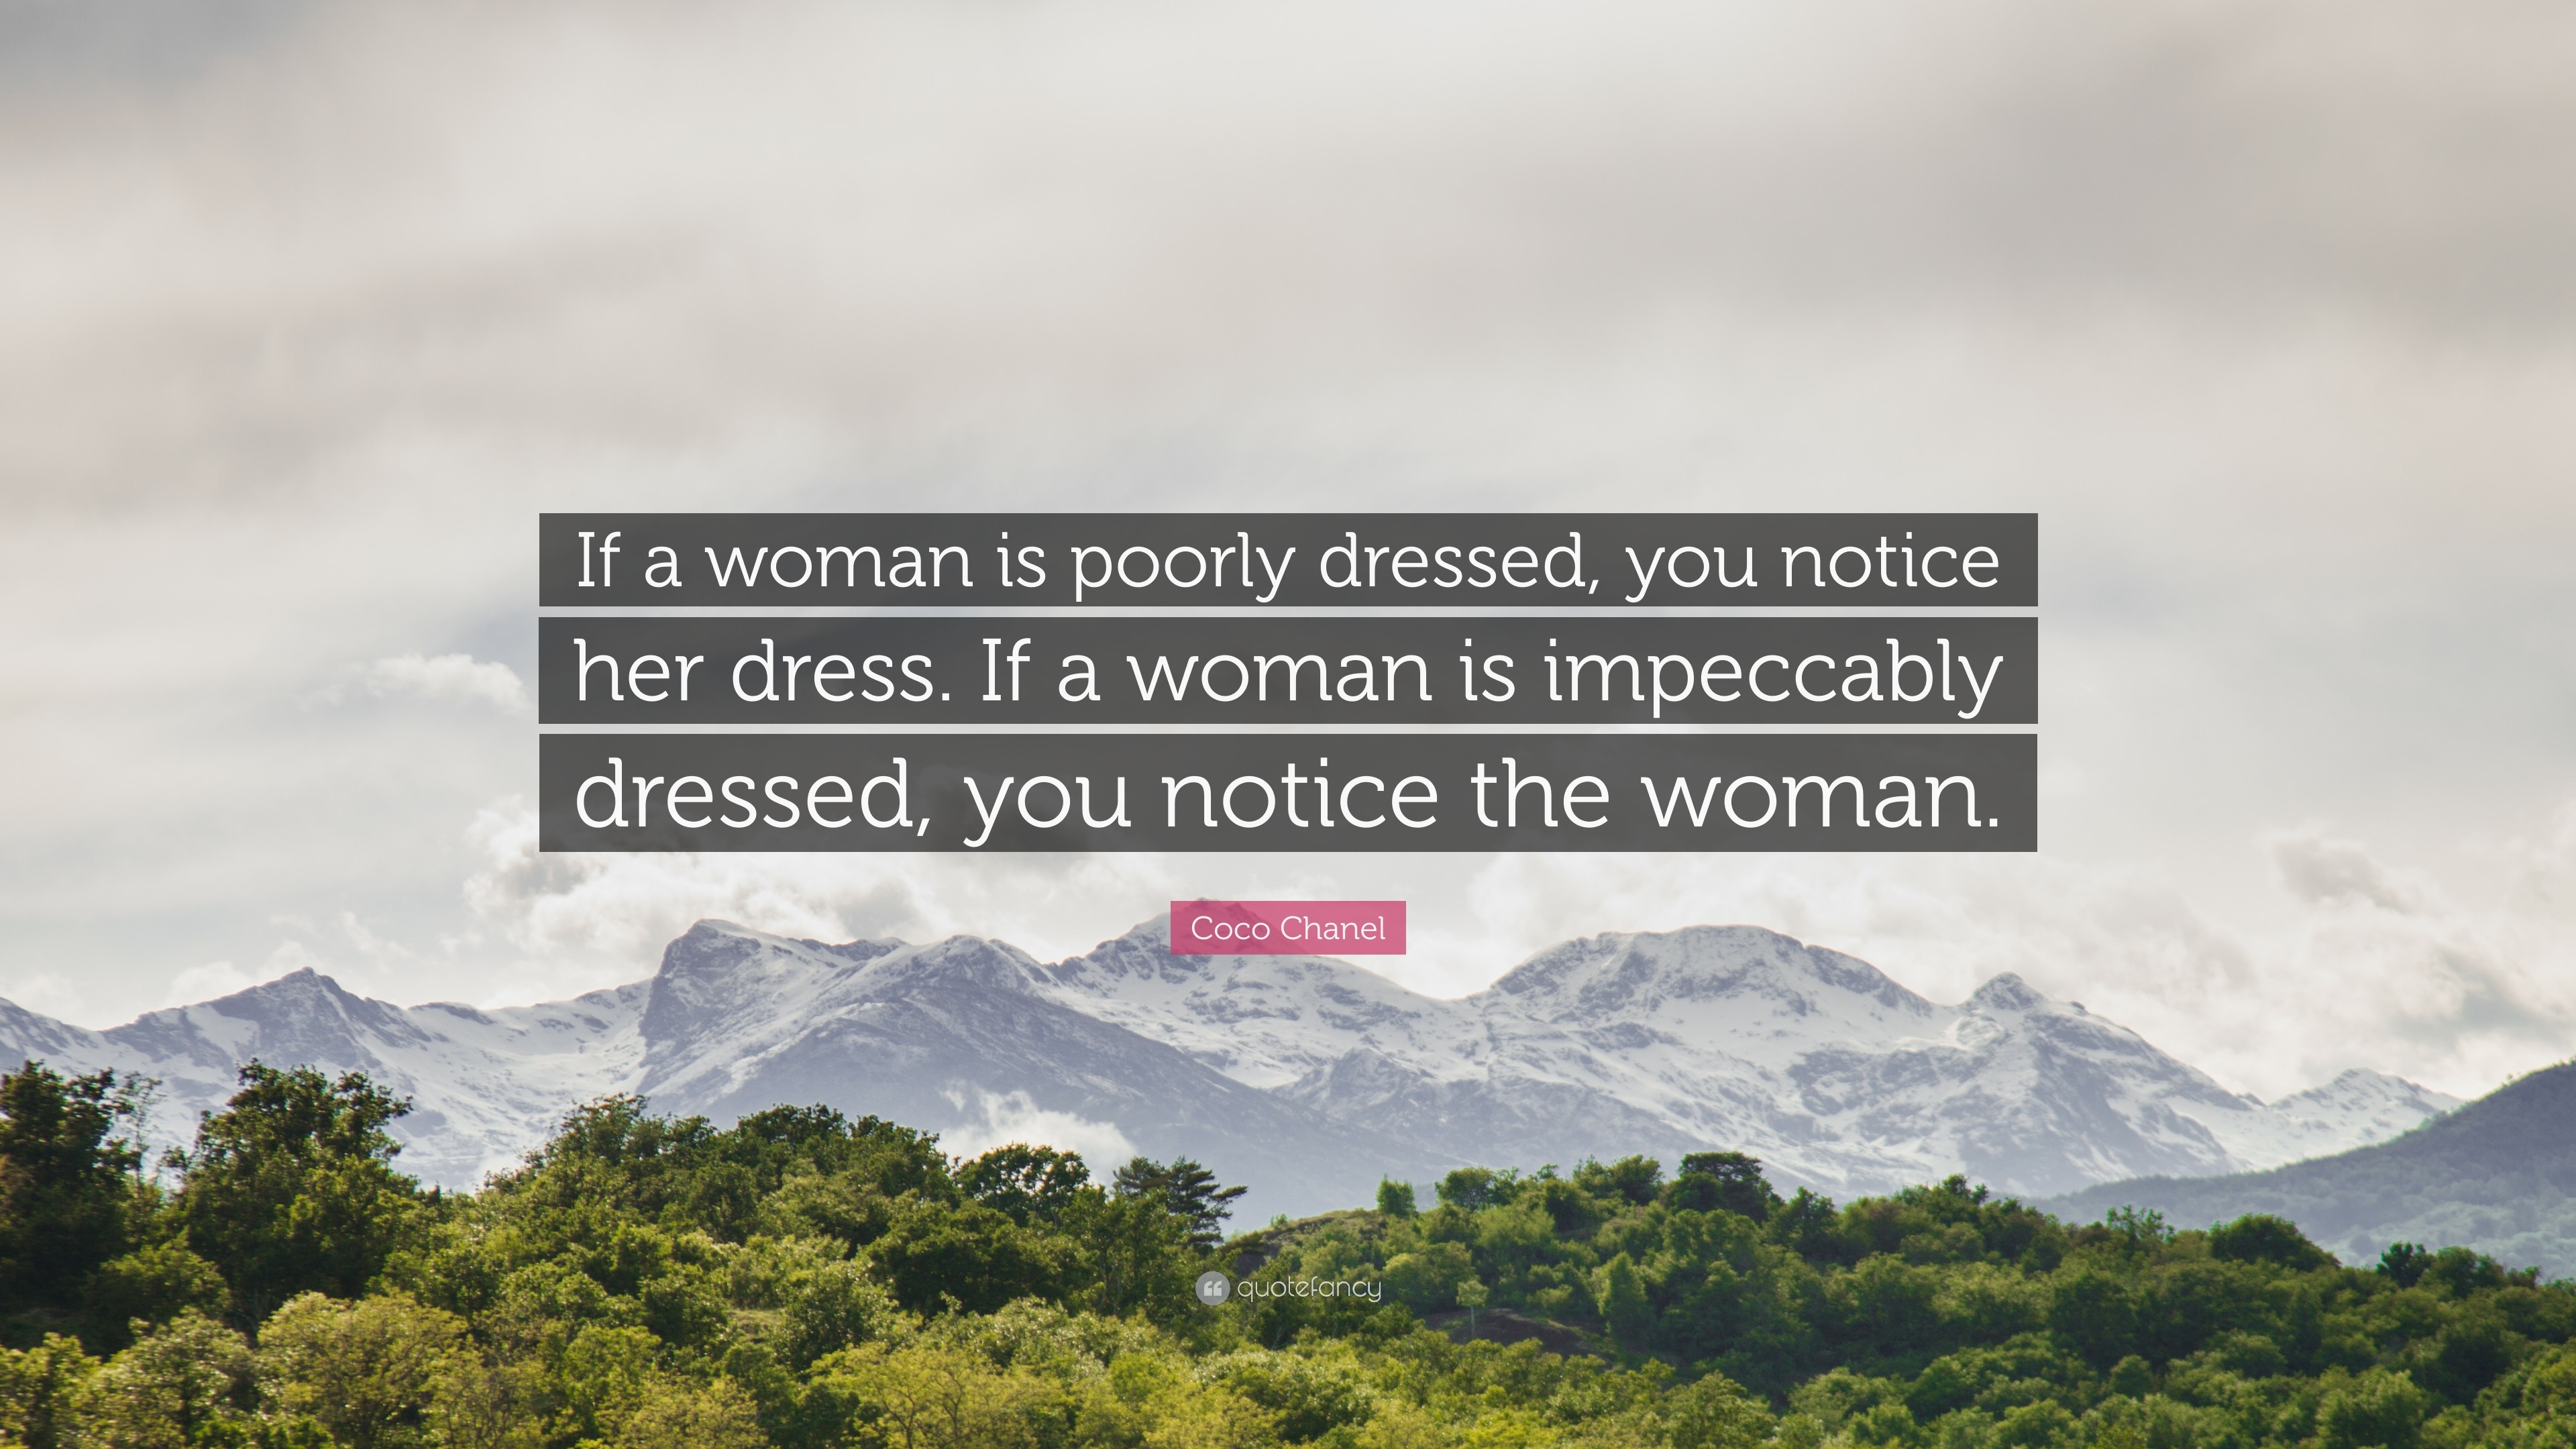 Coco Chanel Quote: “If a woman is poorly dressed, you notice her